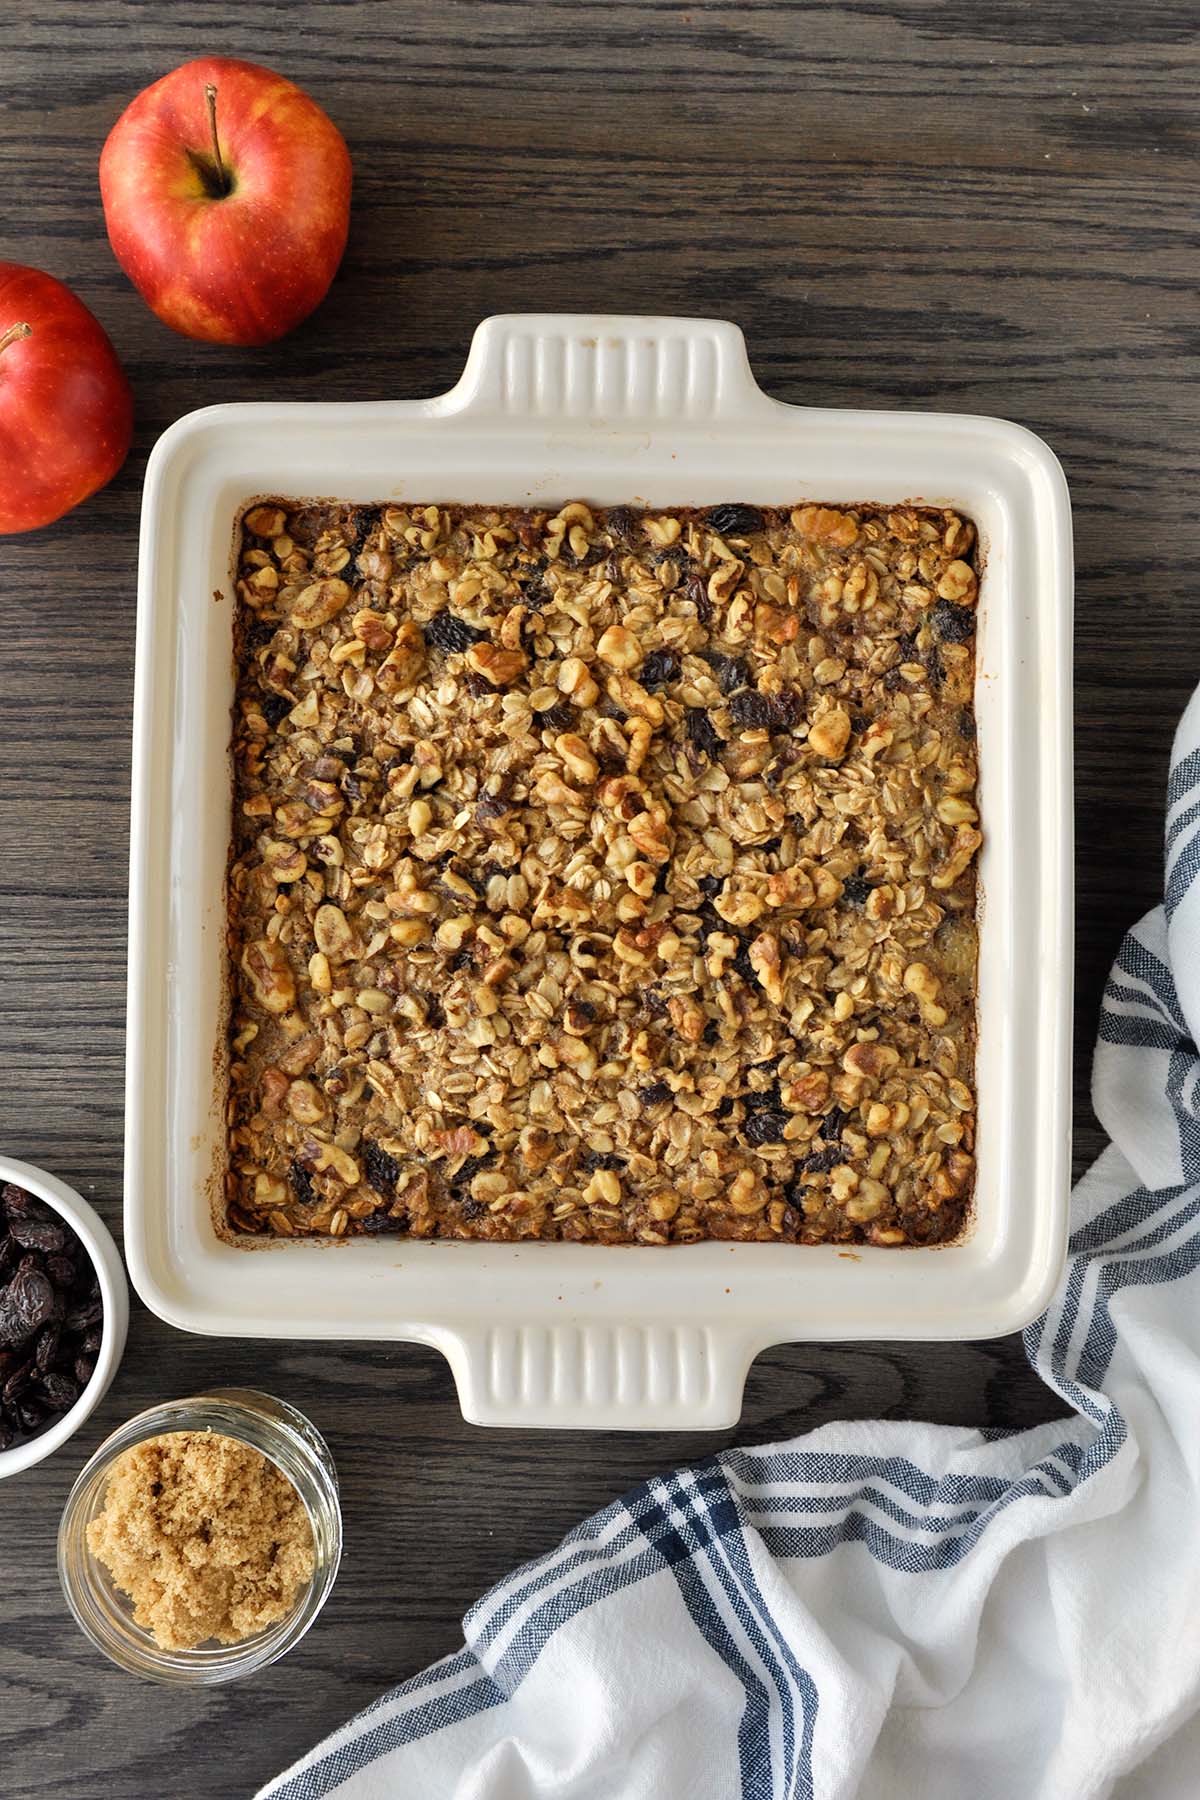 Apple Cinnamon Baked Oatmeal Recipe - Home Cooked Harvest